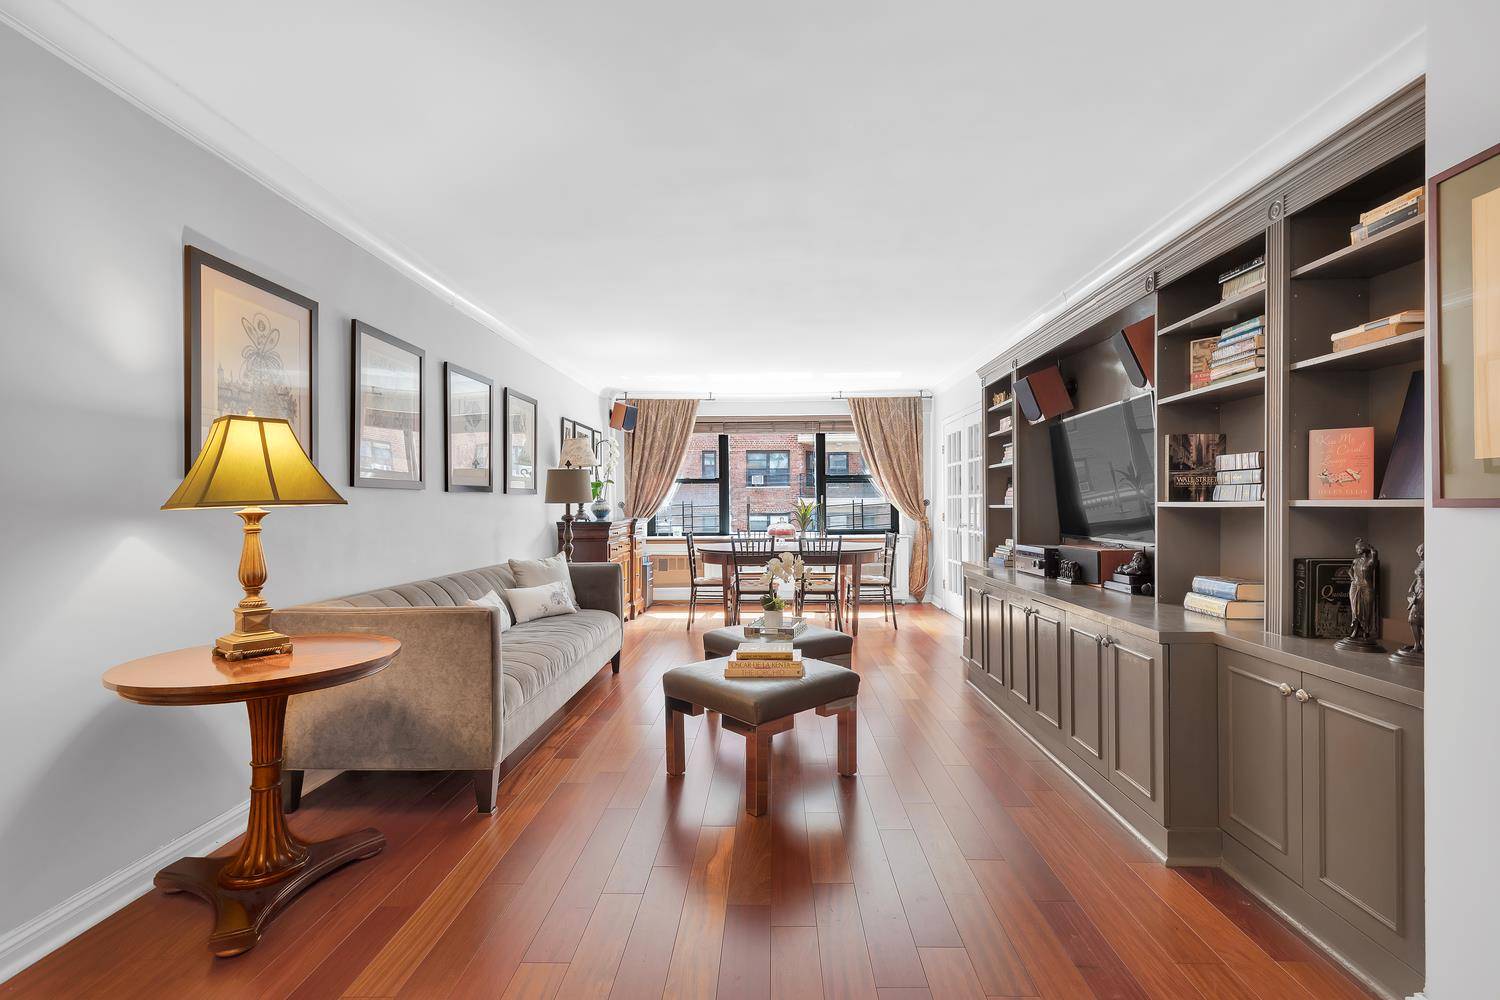 Welcome to this exquisite home nestled in the heart of the Upper East Side.